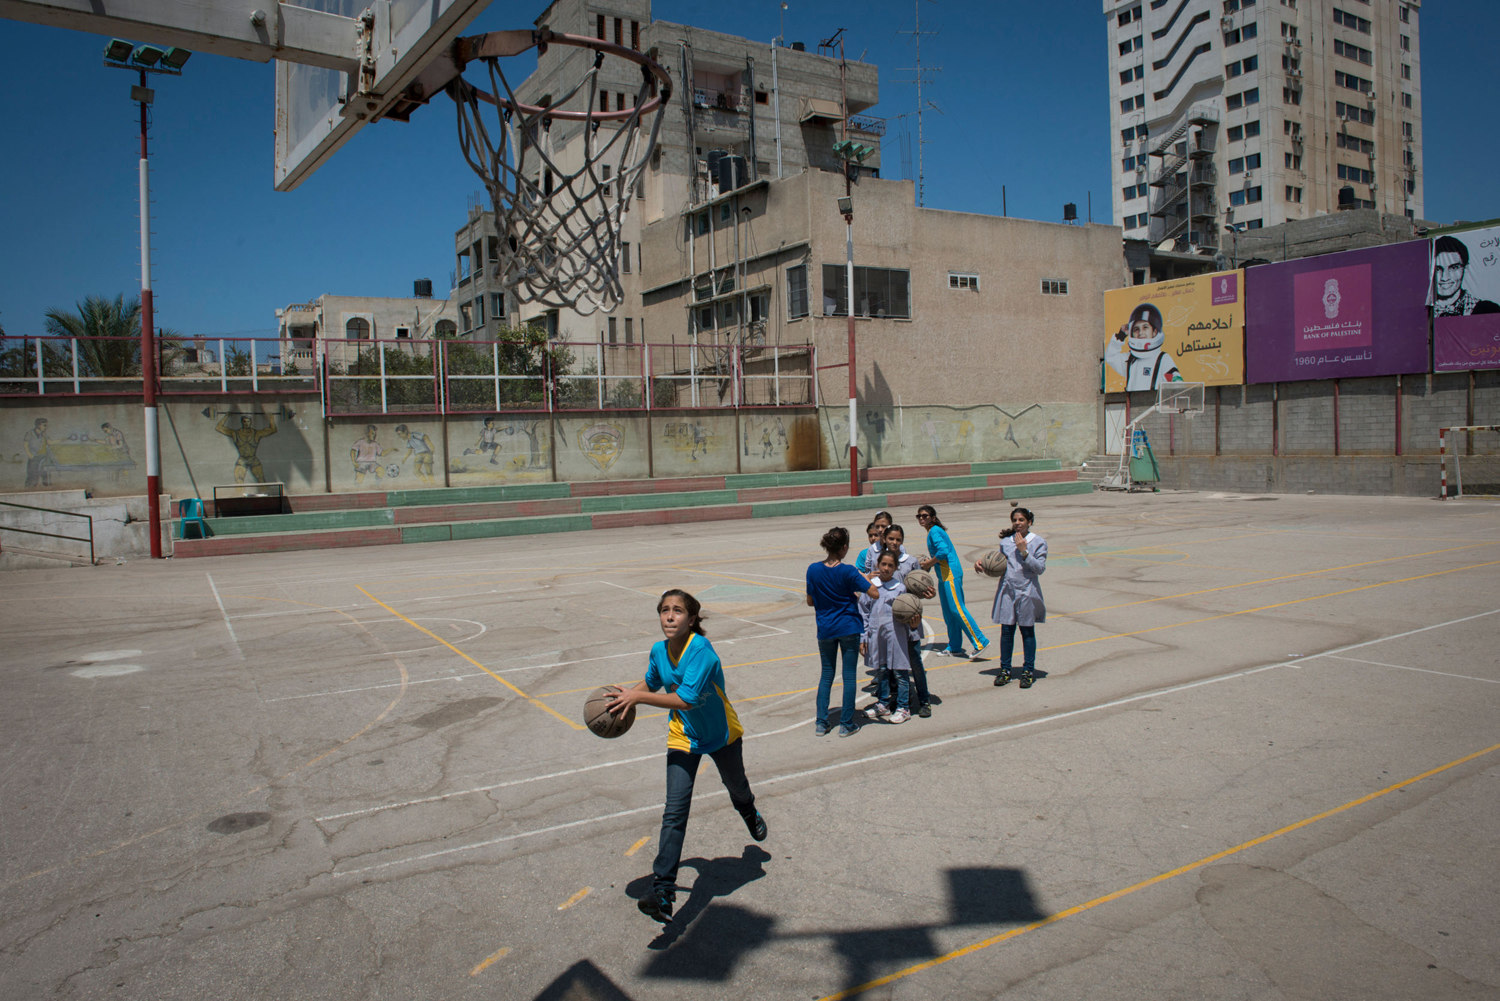  Girls play Basketball at the Gaza Athletic Club, one of the oldest sporting clubs  in the country. The practice is sponsored by PACES, a charity that works to get girls active. Women in Gaza typically do all types of sports till the age of 16, when 